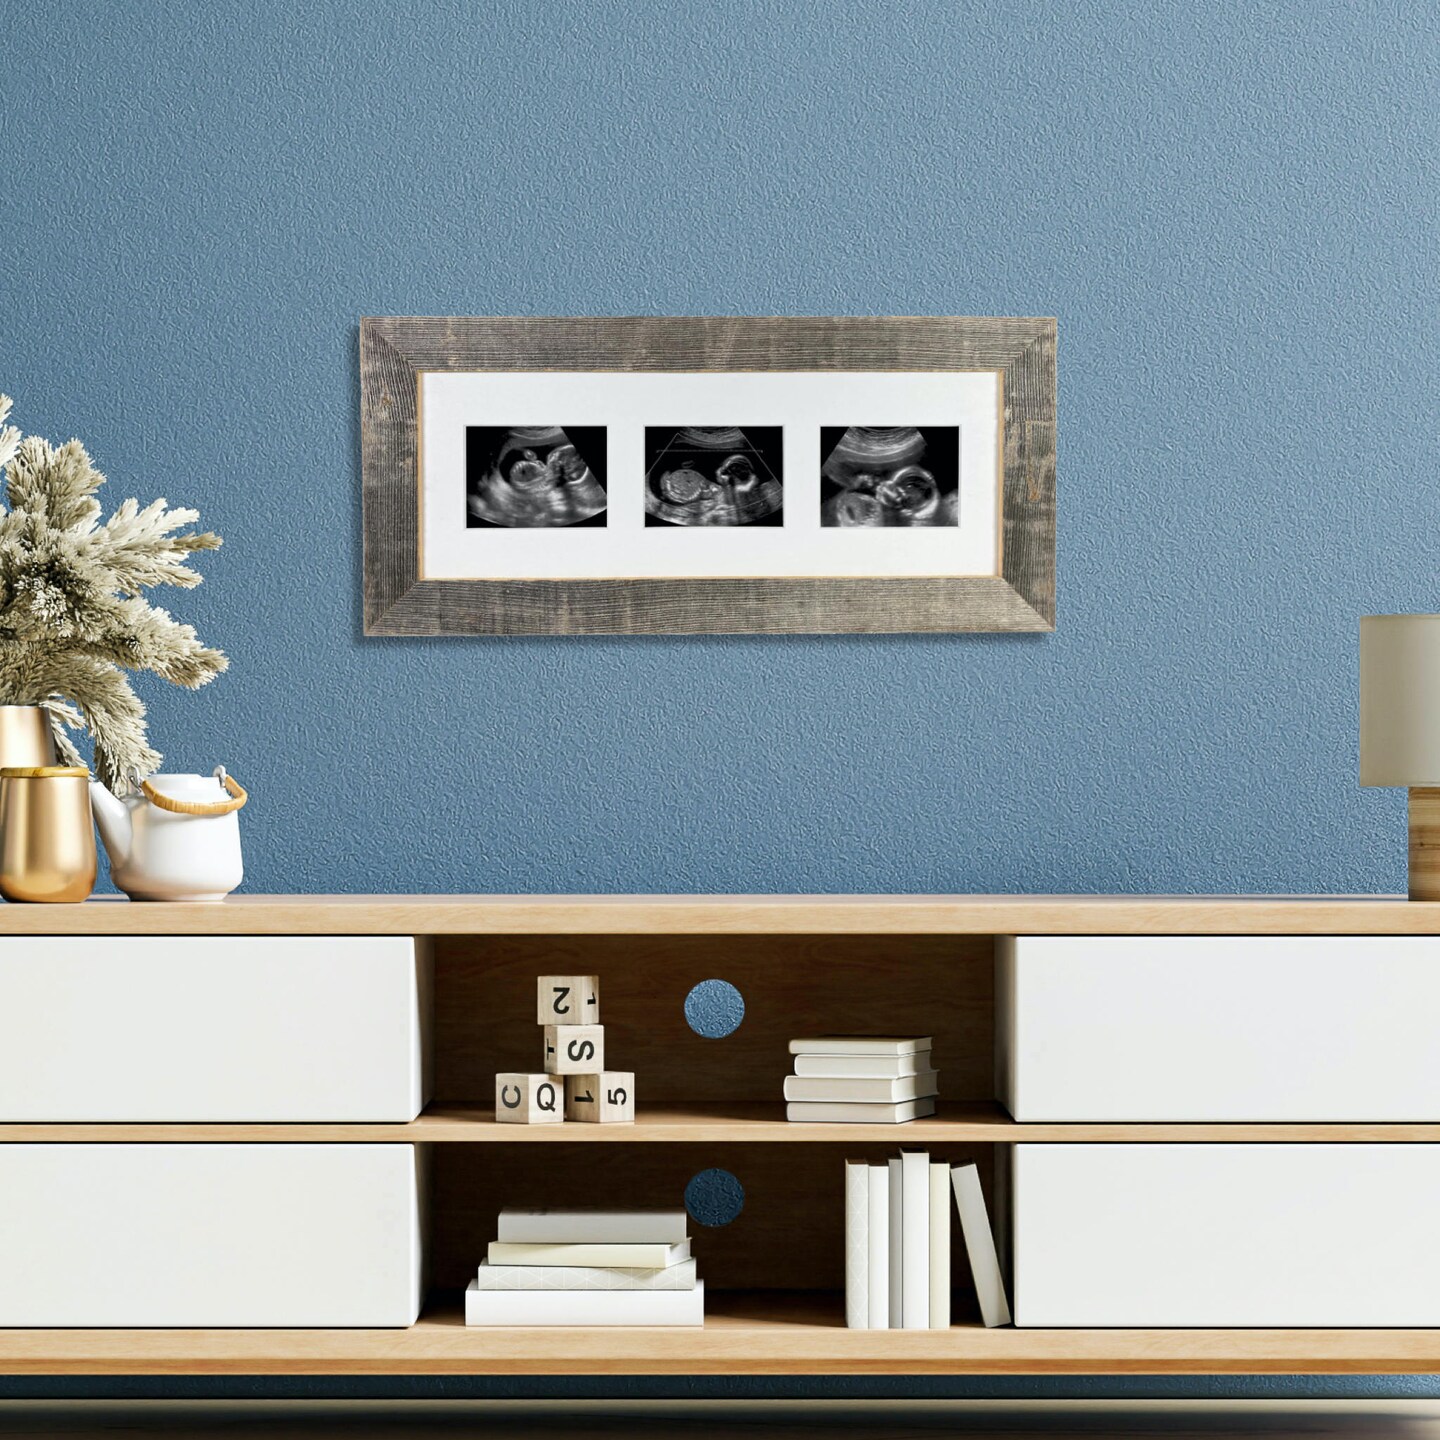 Rustic Farmhouse Sonogram Series Reclaimed Wood Picture Frame with 3 Openings for Sonogram photos